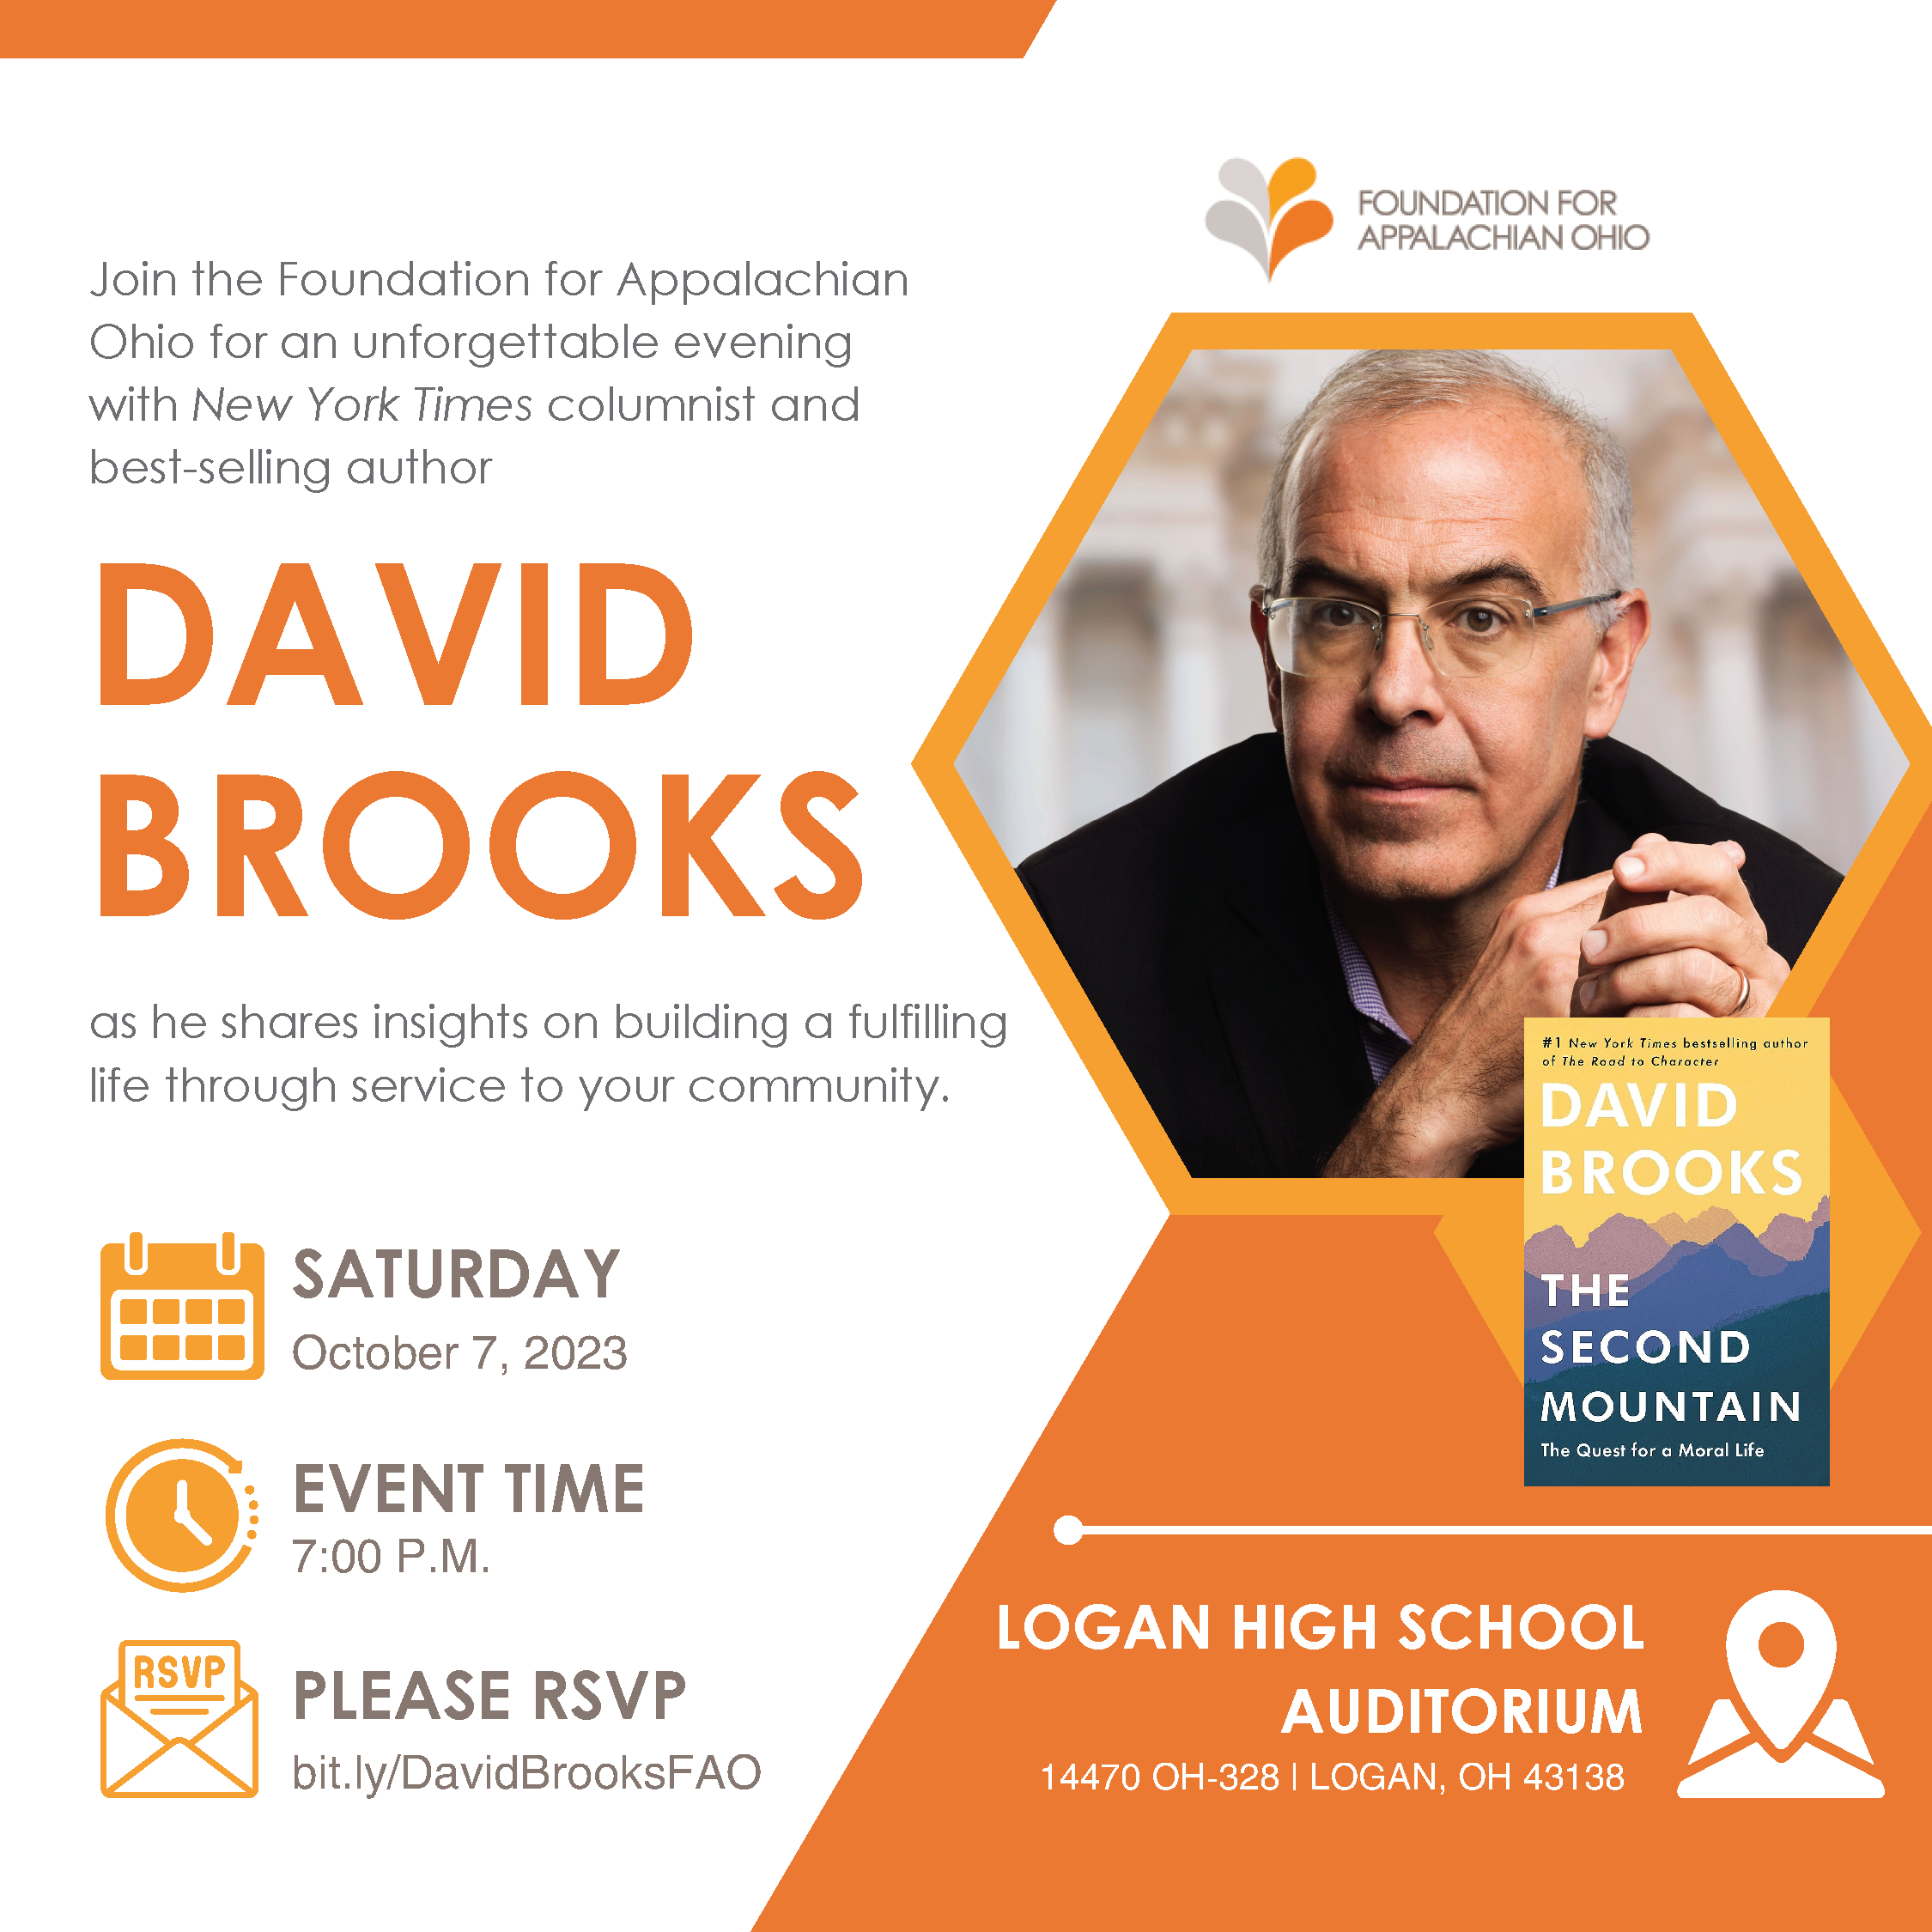 A flyer for an event featuring David Brooks.